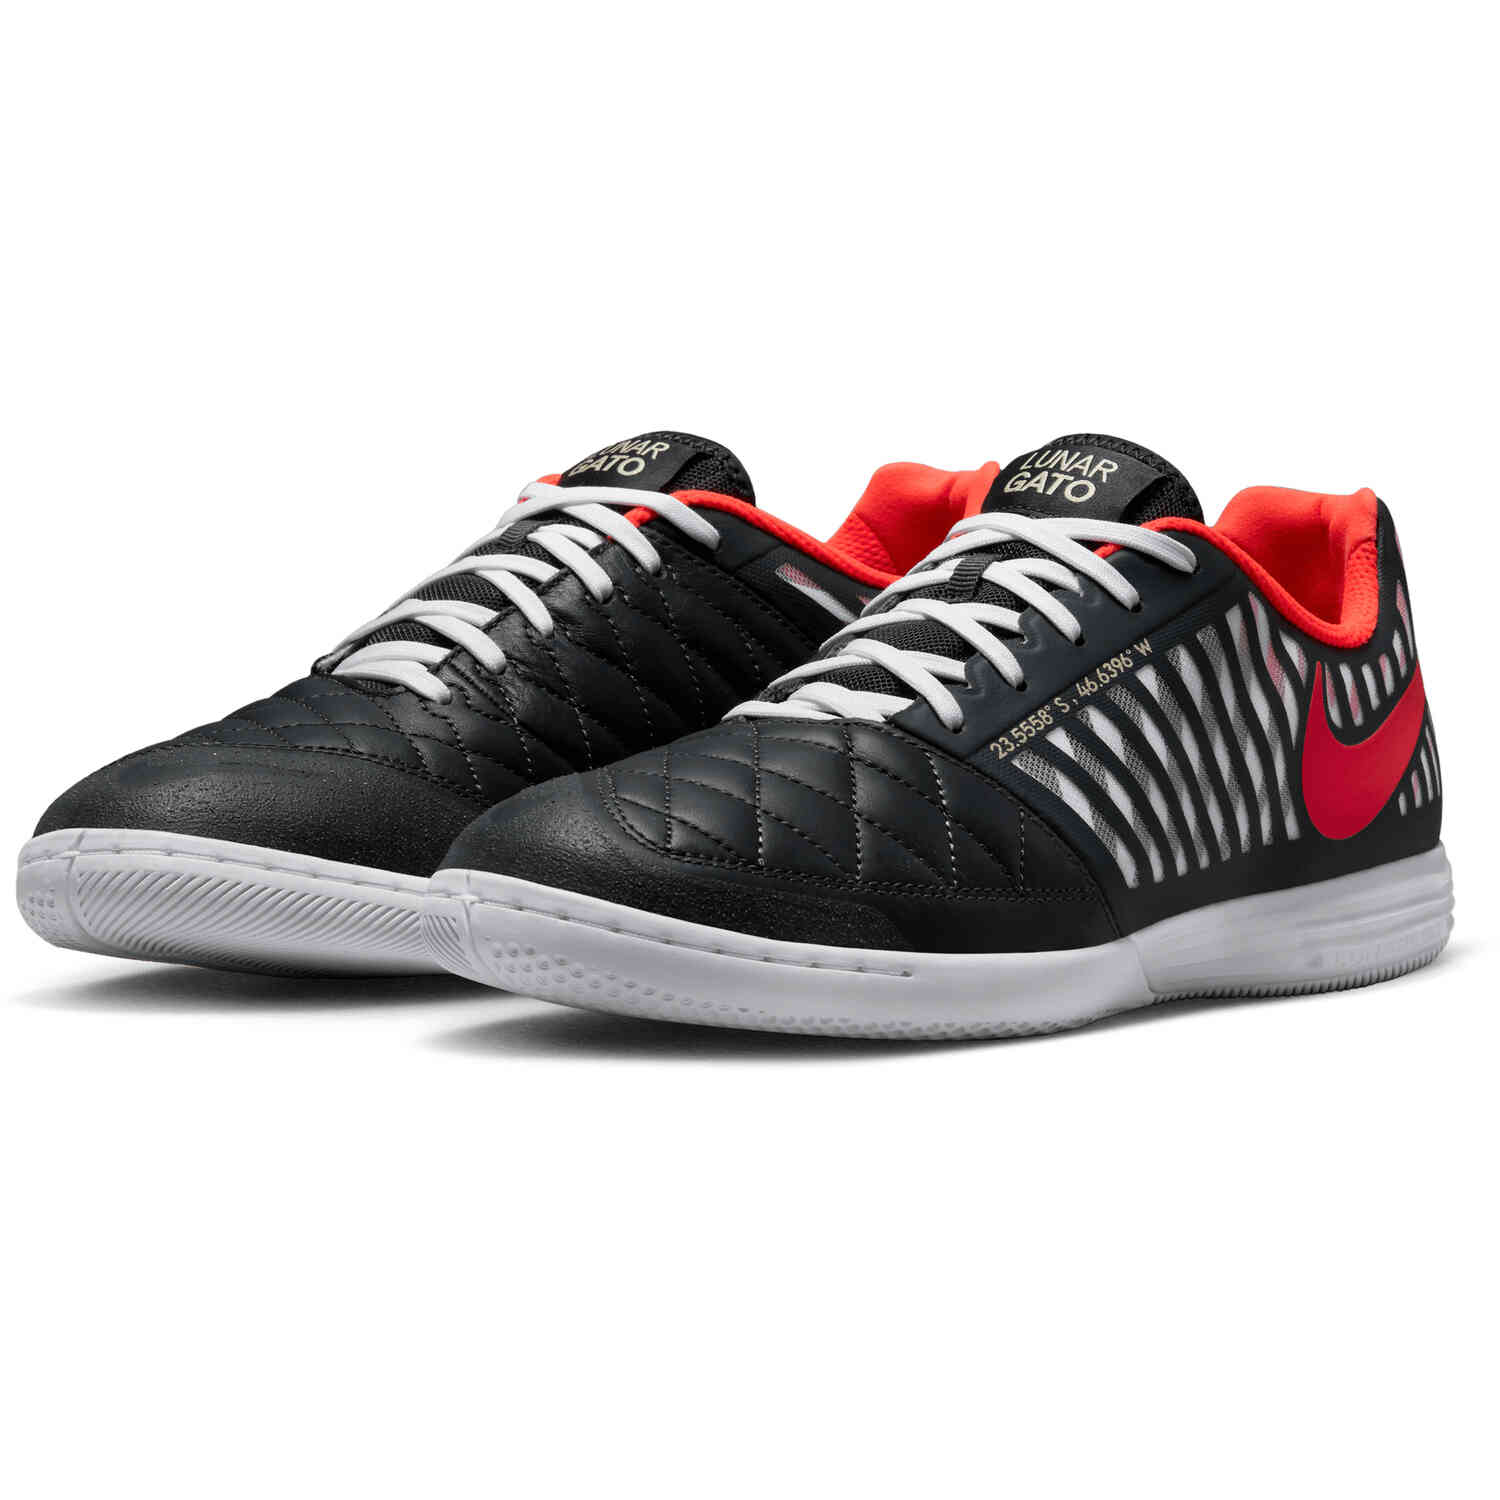 Bedrijfsomschrijving slinger nakoming Nike Lunargato II IC - Anthracite & Infrared 23 with White with Team Gold -  SoccerPro